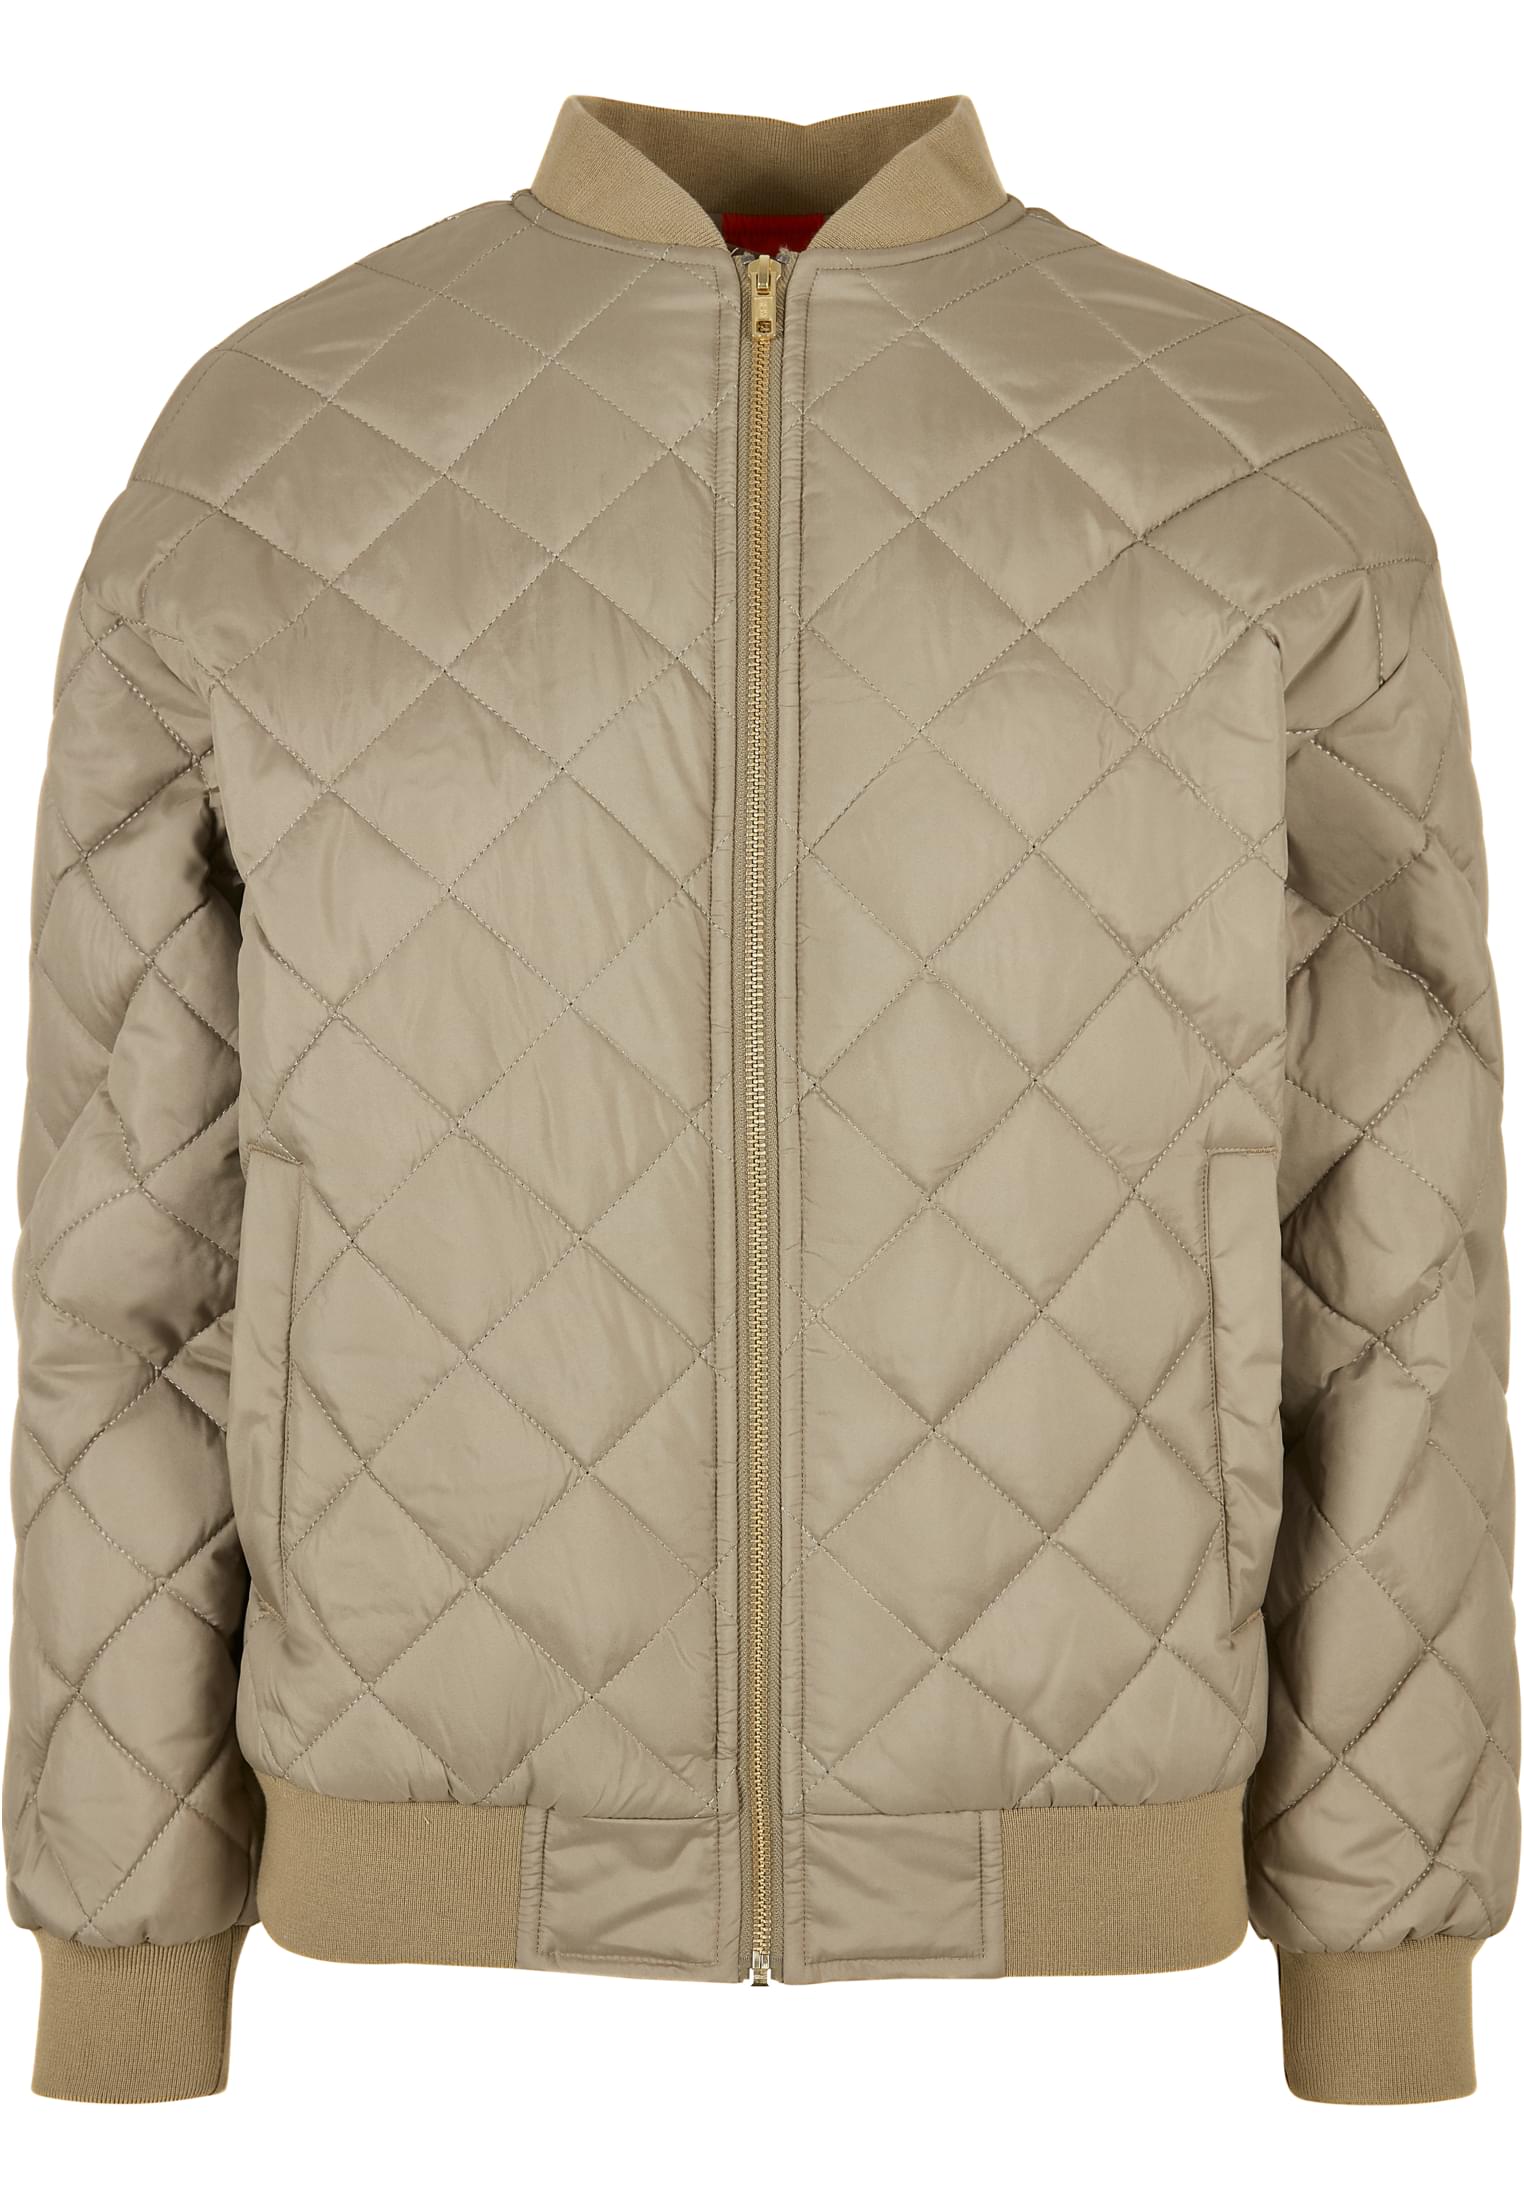 Diamond Quilted Rawhide Brown Bomber Jacket – miles the label